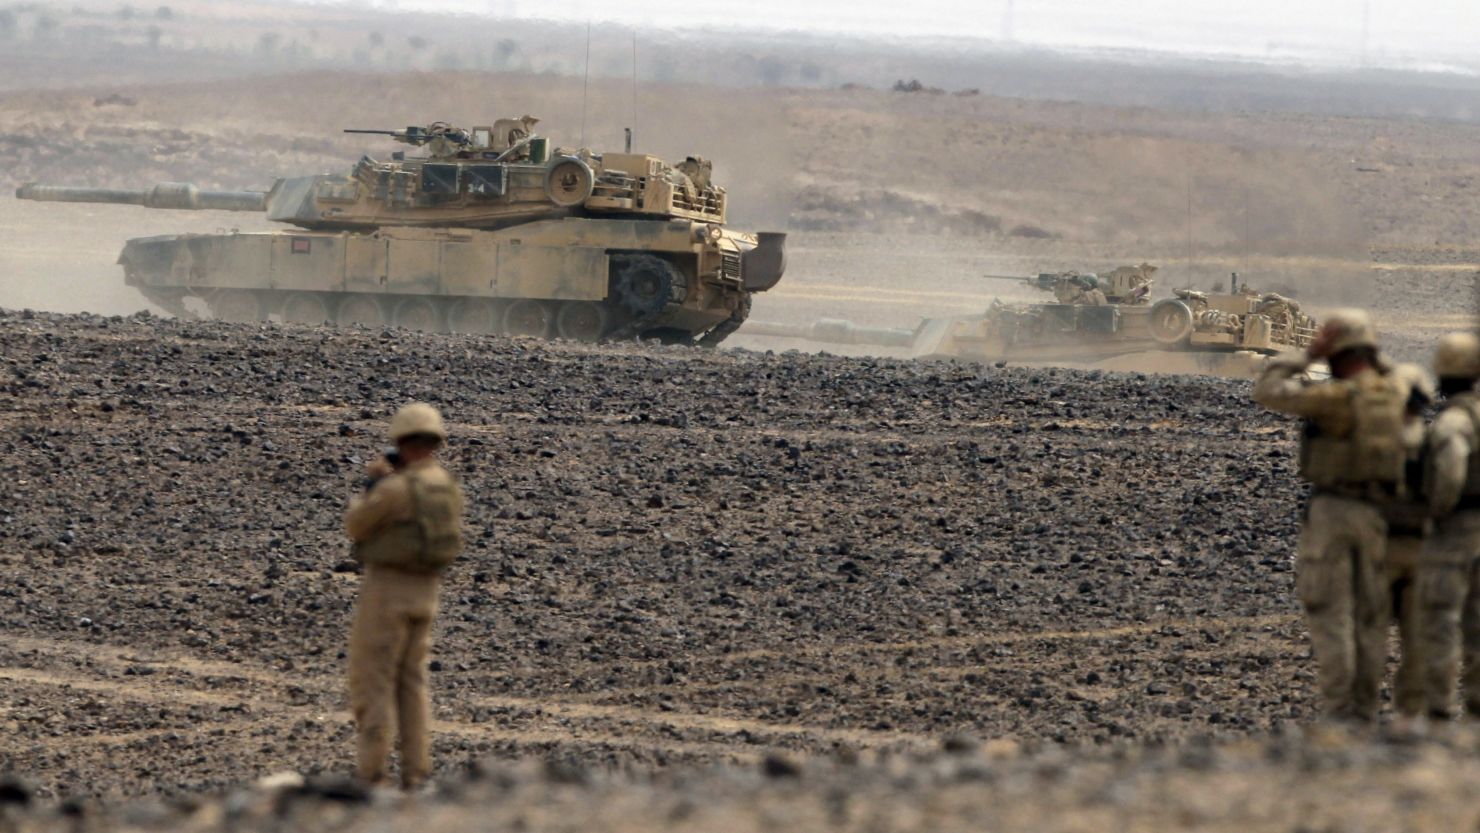 Soldiers watch tanks advancing as they take part in joint Jordan-US maneuvers during the "Eager Lion" military exercises in Mudawwara, near the border with Saudi Arabia, some 280 kilometers south of the Jordanian capital, Amman, on May 18, 2015. 